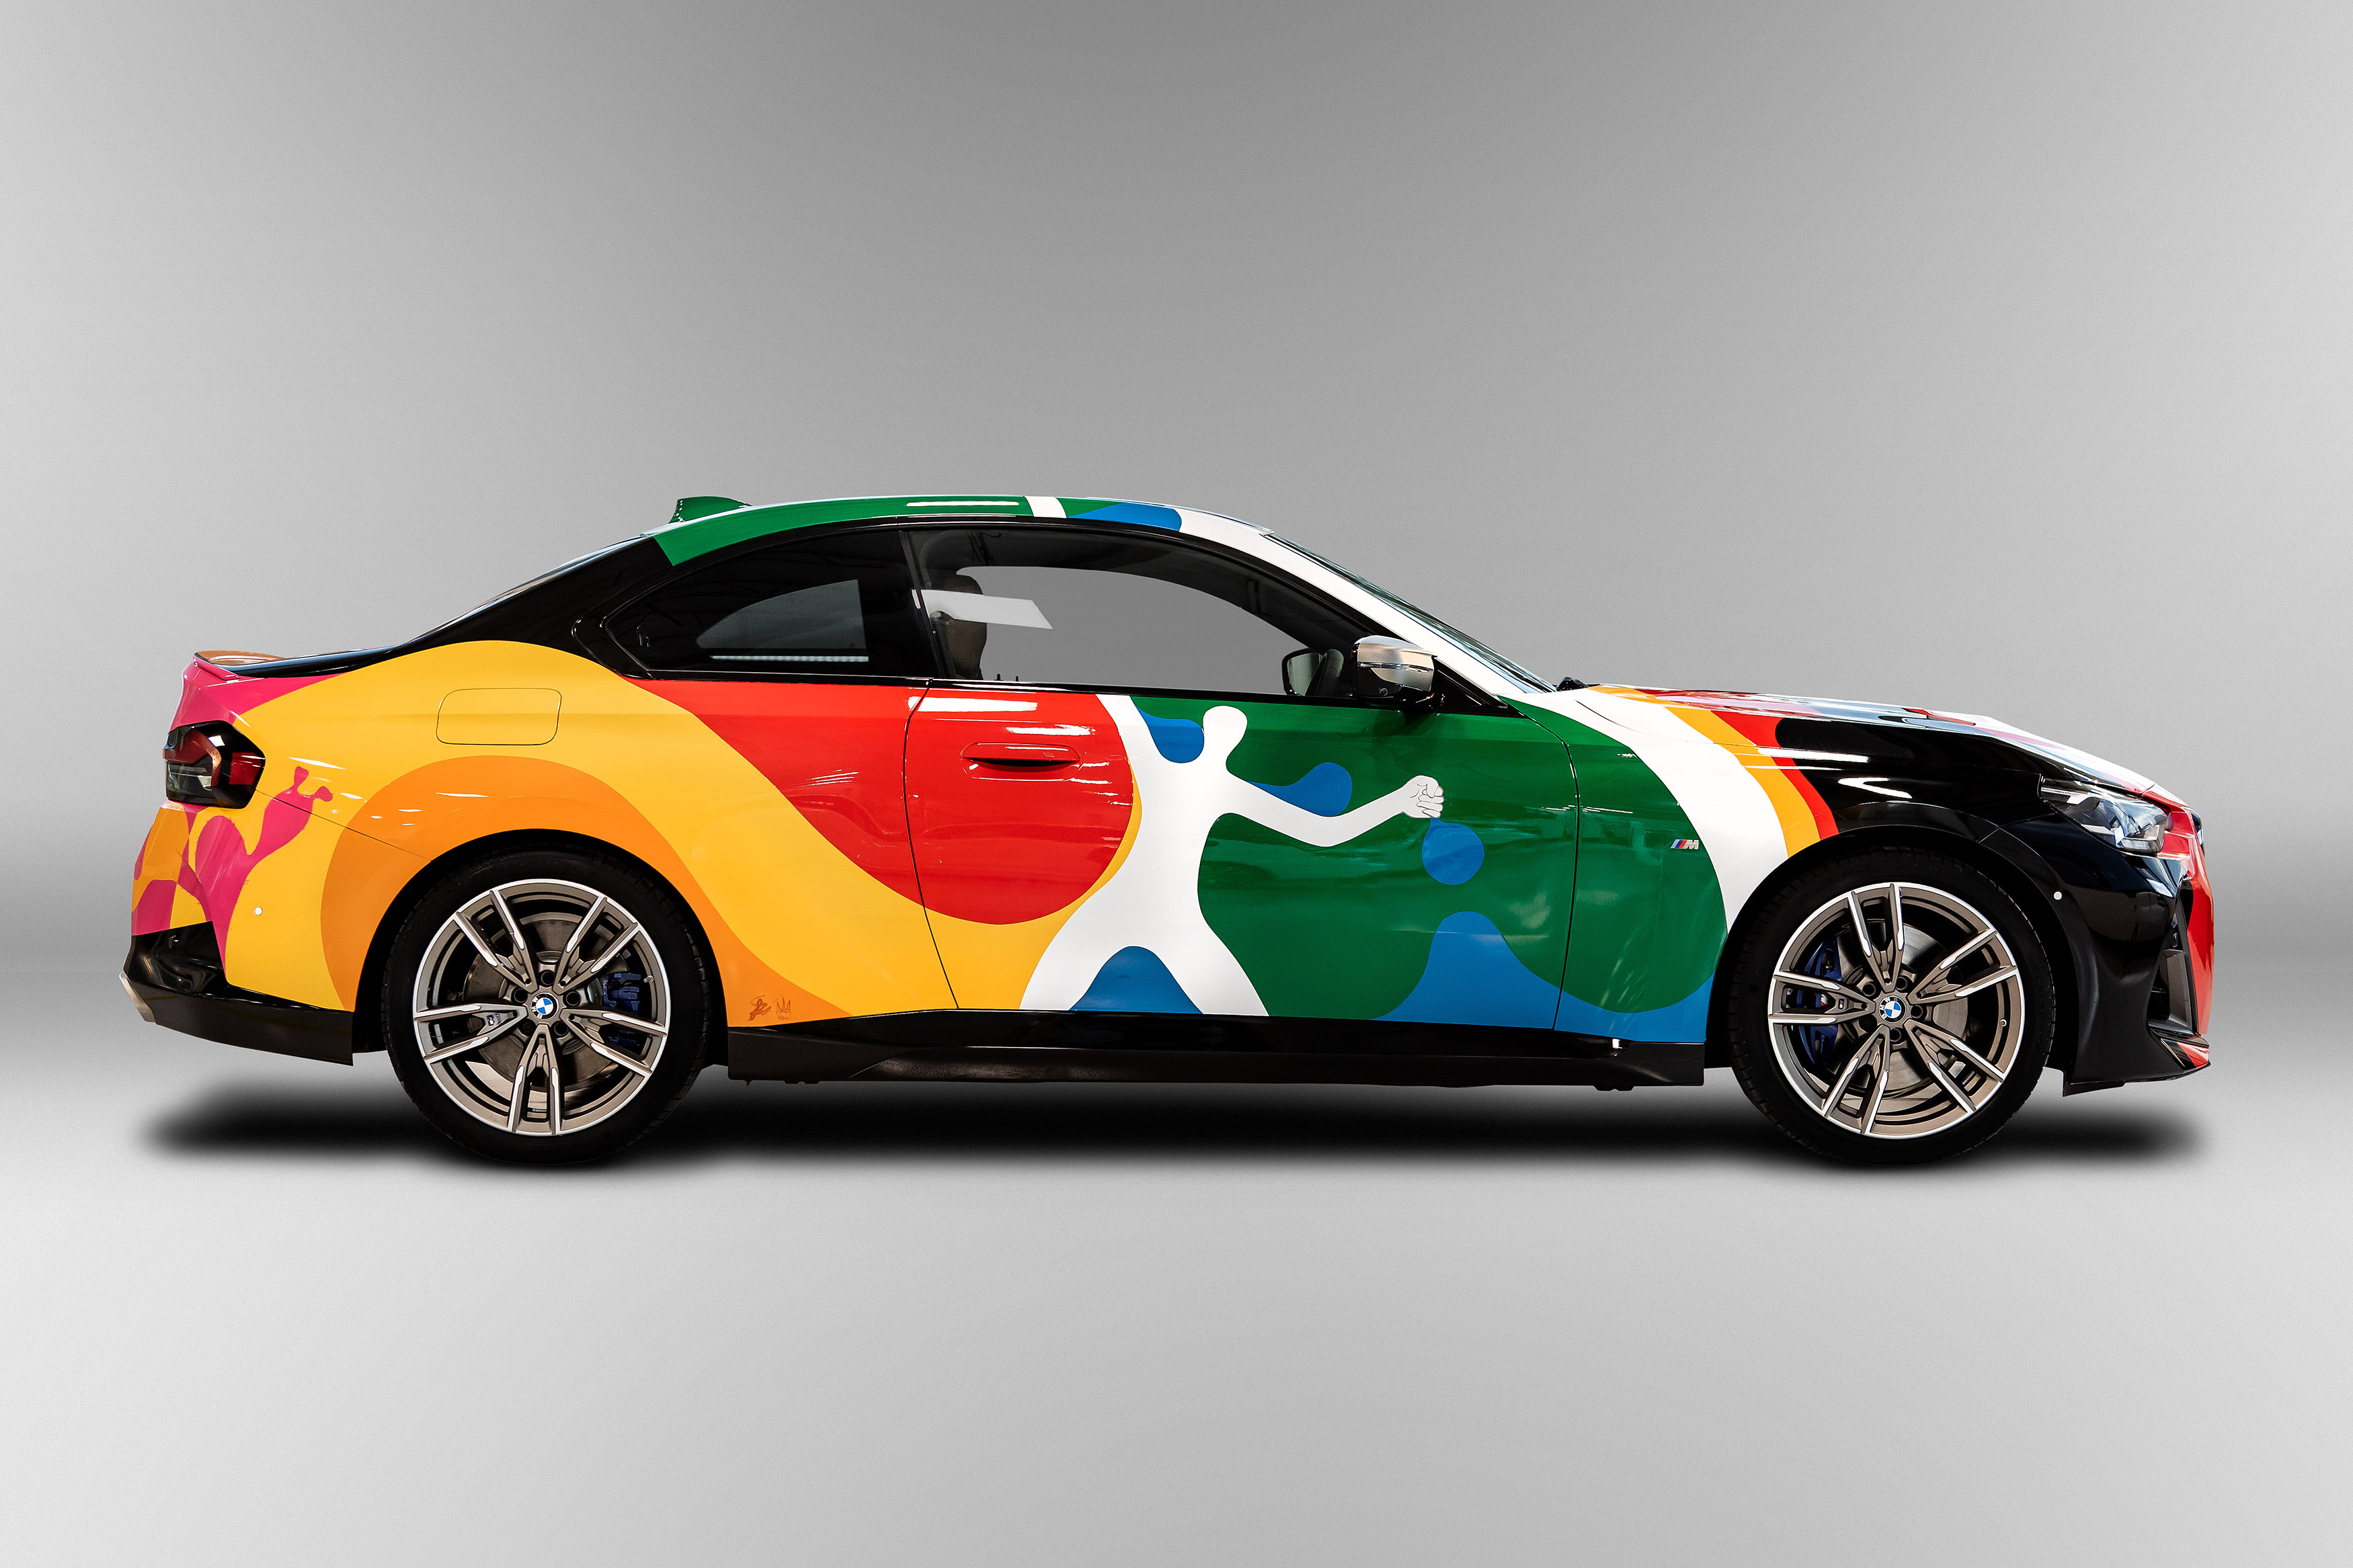 New BMW 2 Series Coupe turned into a piece of art